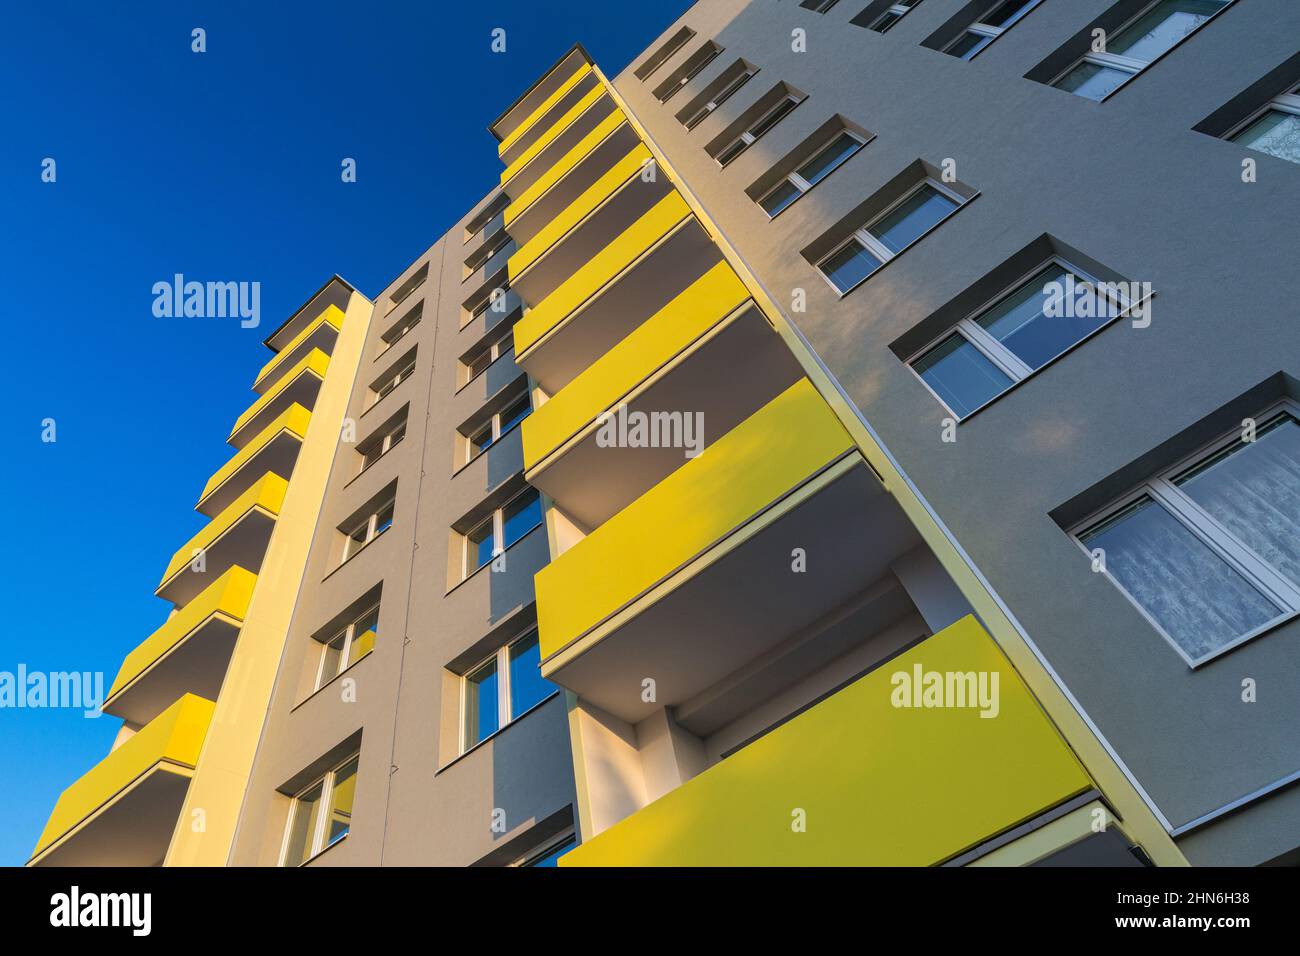 Facade of a renovated apartment block of flats with balconies. Stock Photo